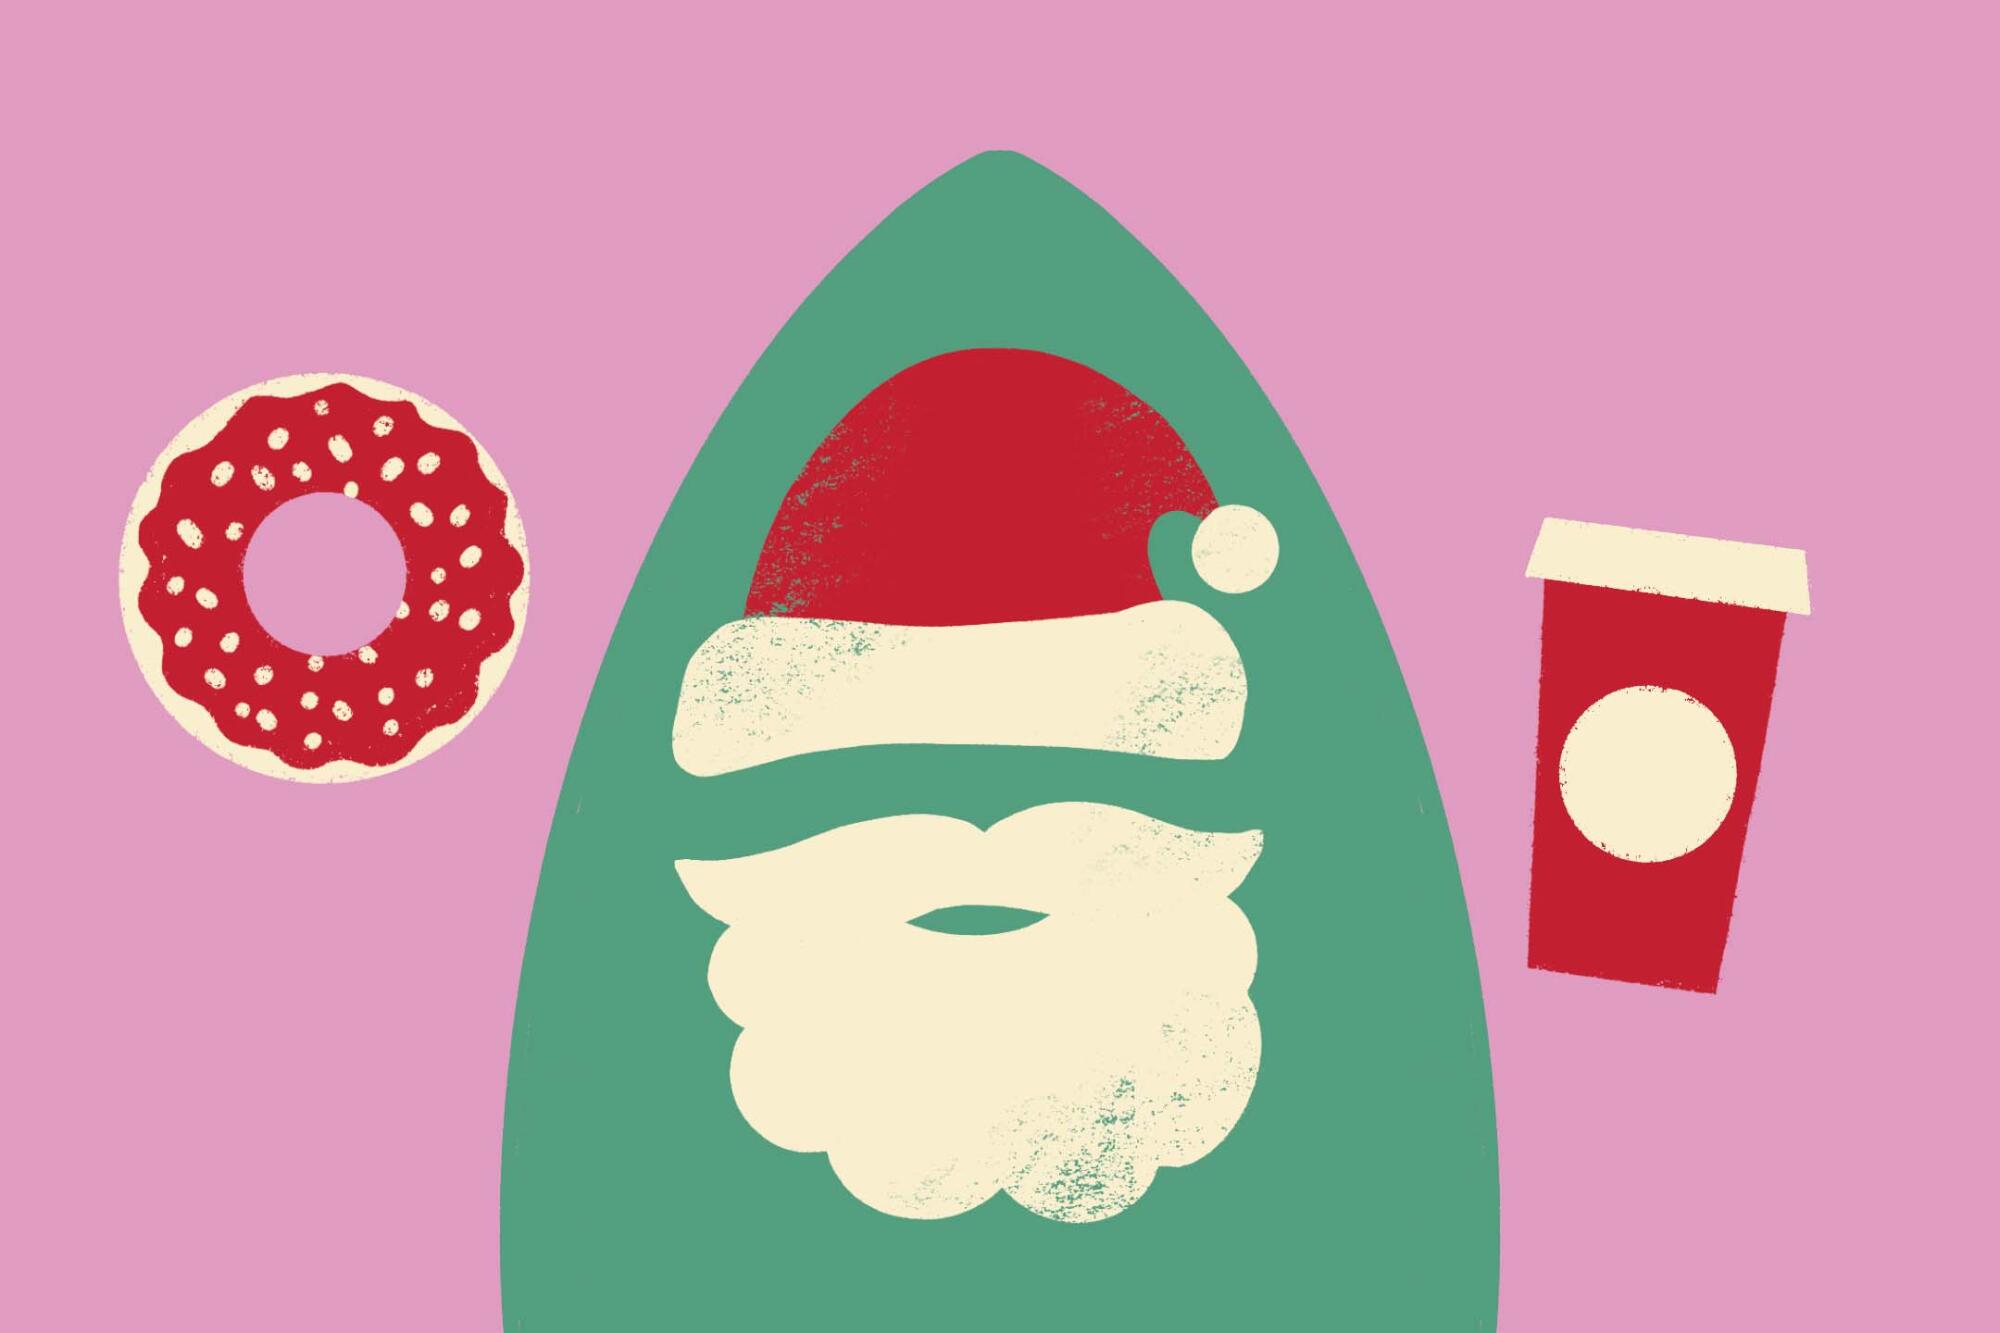 Illustration of a Santa face next to coffee and a doughnut.